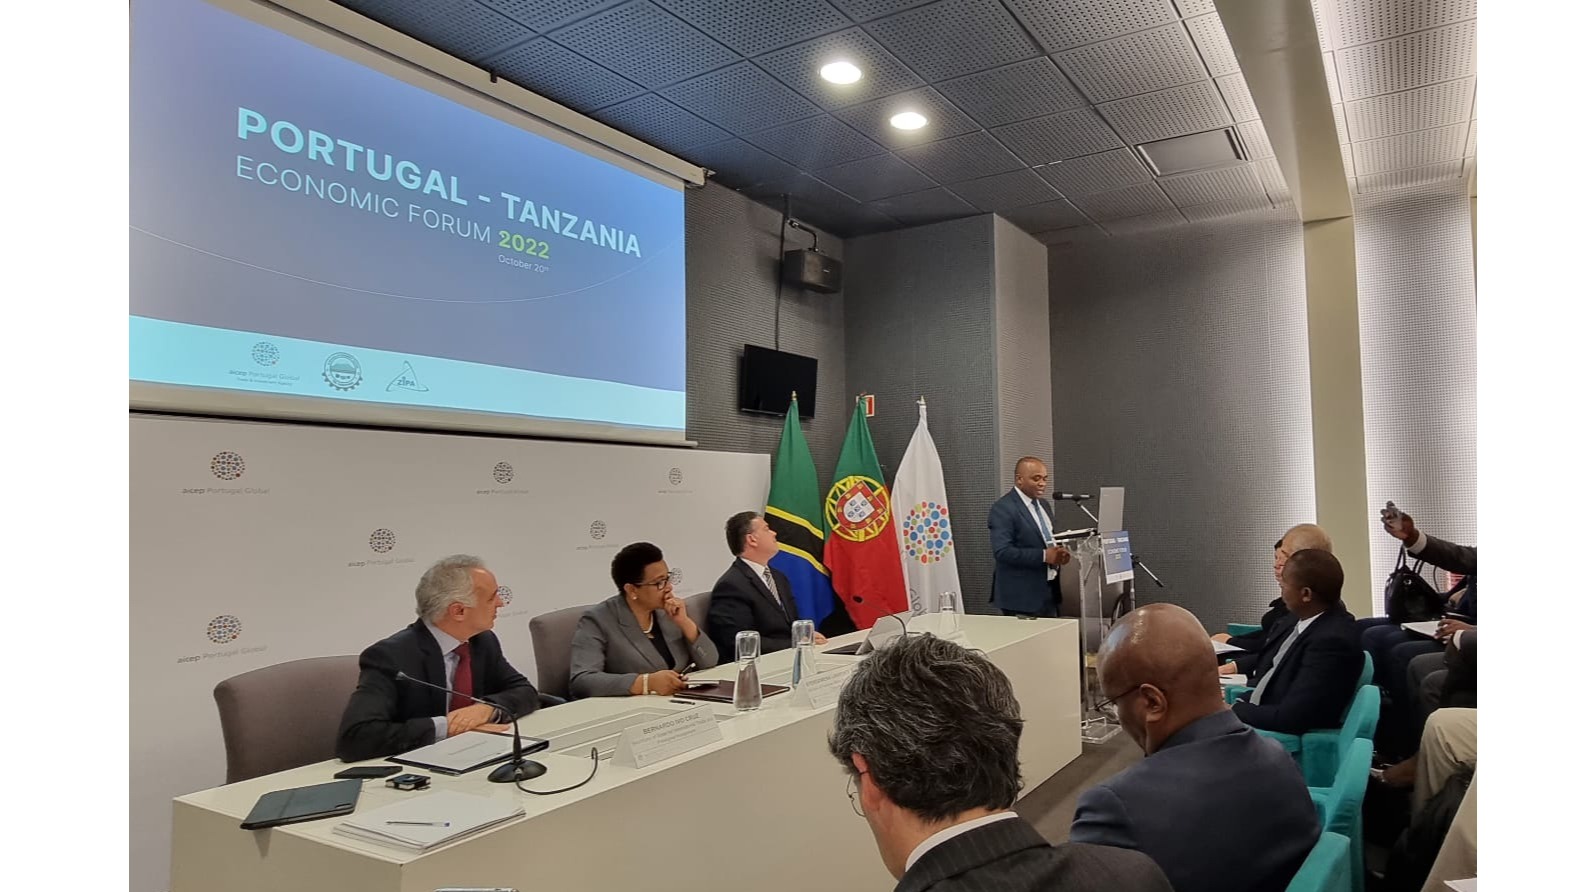 TANZANIA PROMOTES INVESTMENT OPPORTUNITIES IN PORTUGAL